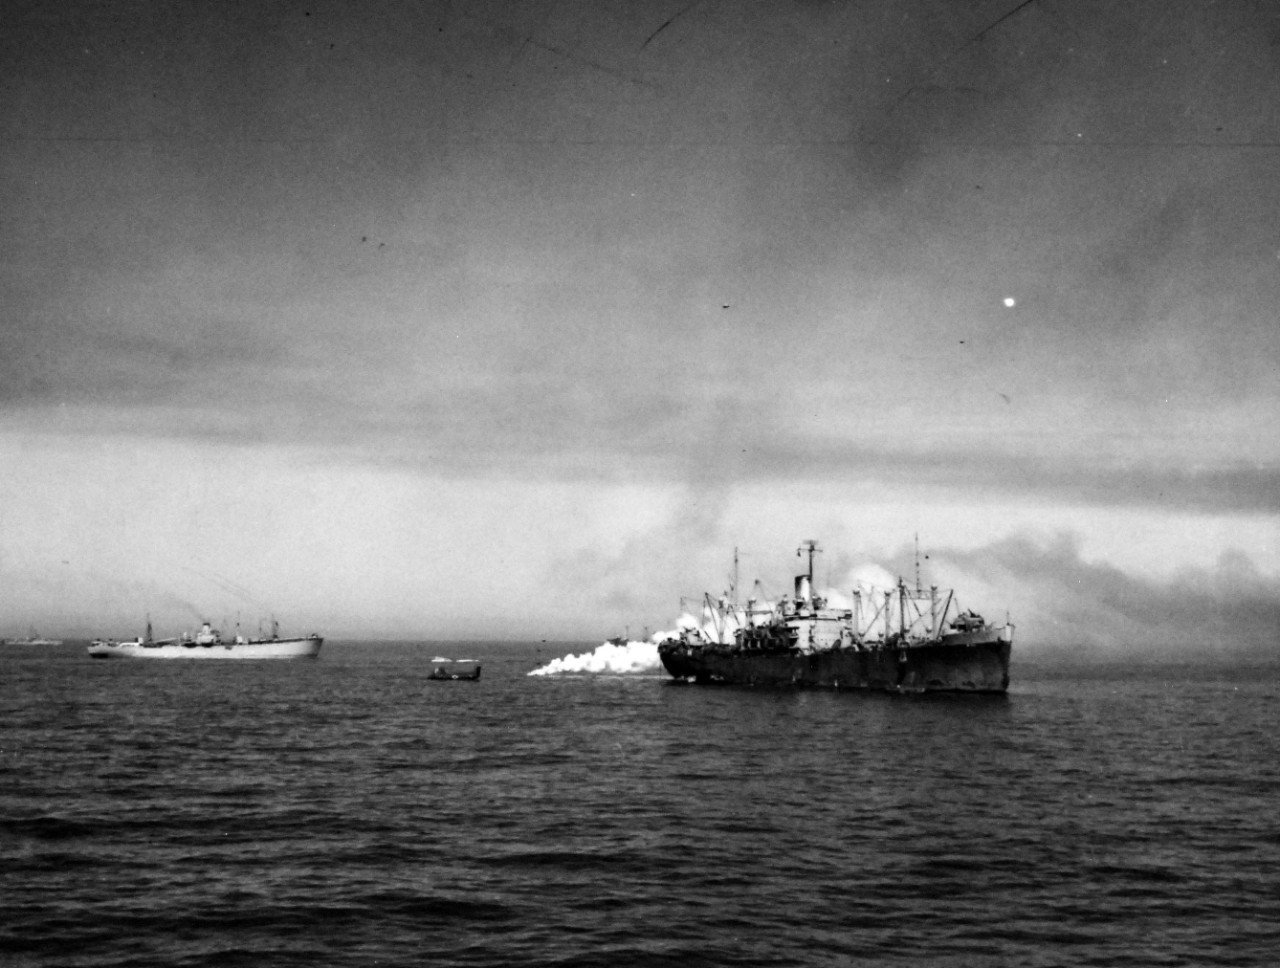 80-G-74831:   Operation Husky, July-August 1943.   Beginning of smoke screens to cover ships before an air attack off shore at Gela, Sicily.   Photographed by USS Boise (CL-47), July 10 1943.    Official U.S. Navy Photograph, now in the collections of the National Archives.  (2018/02/14).    